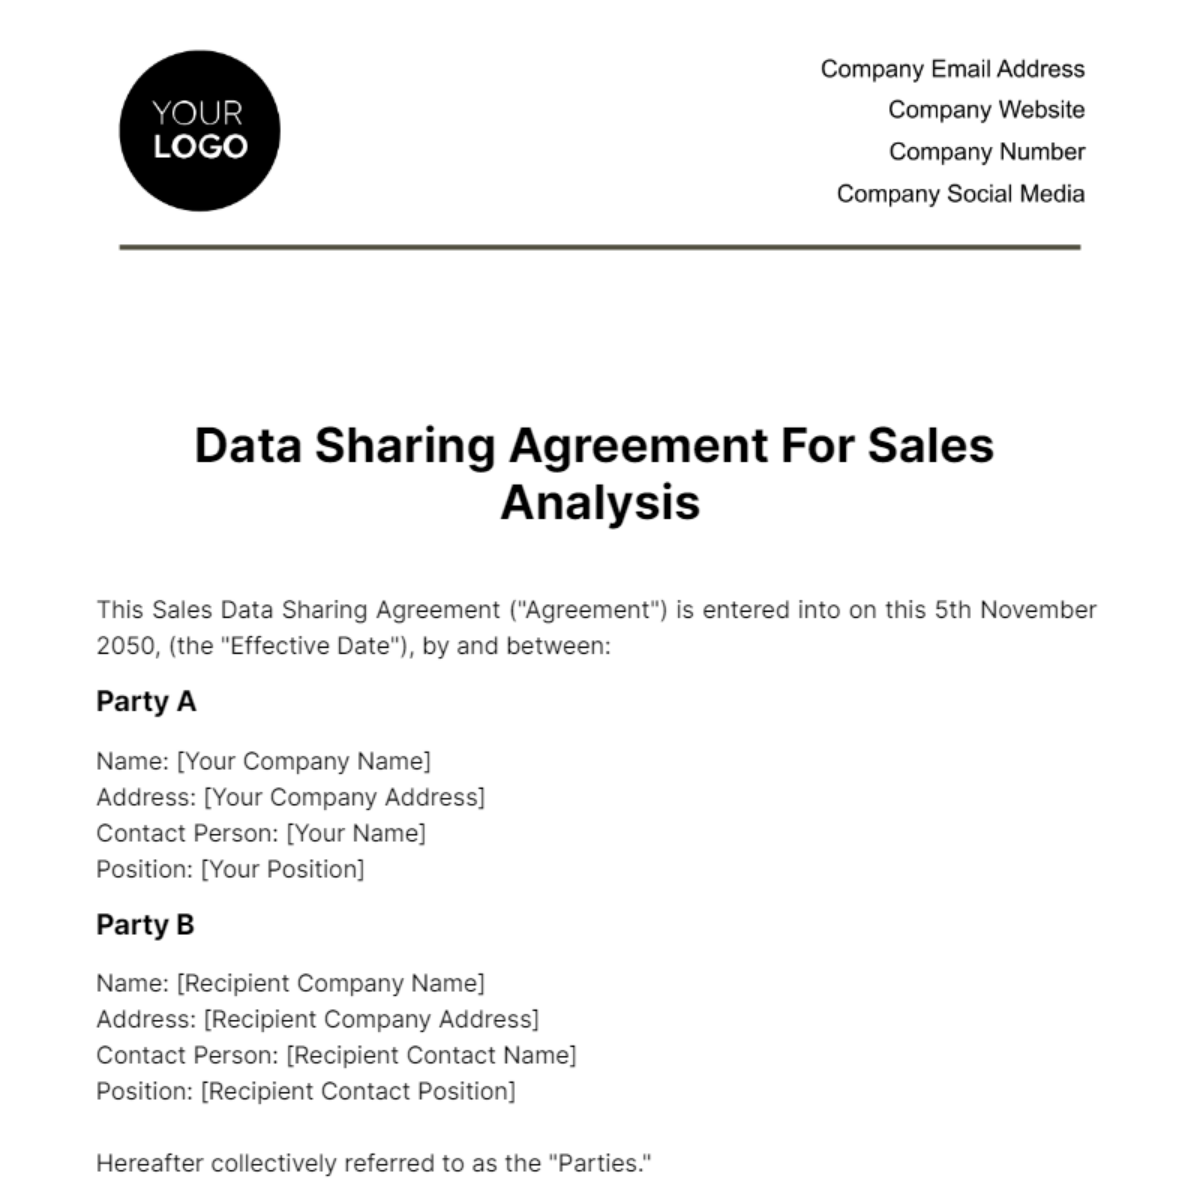 Data Sharing Agreement for Sales Analysis Template